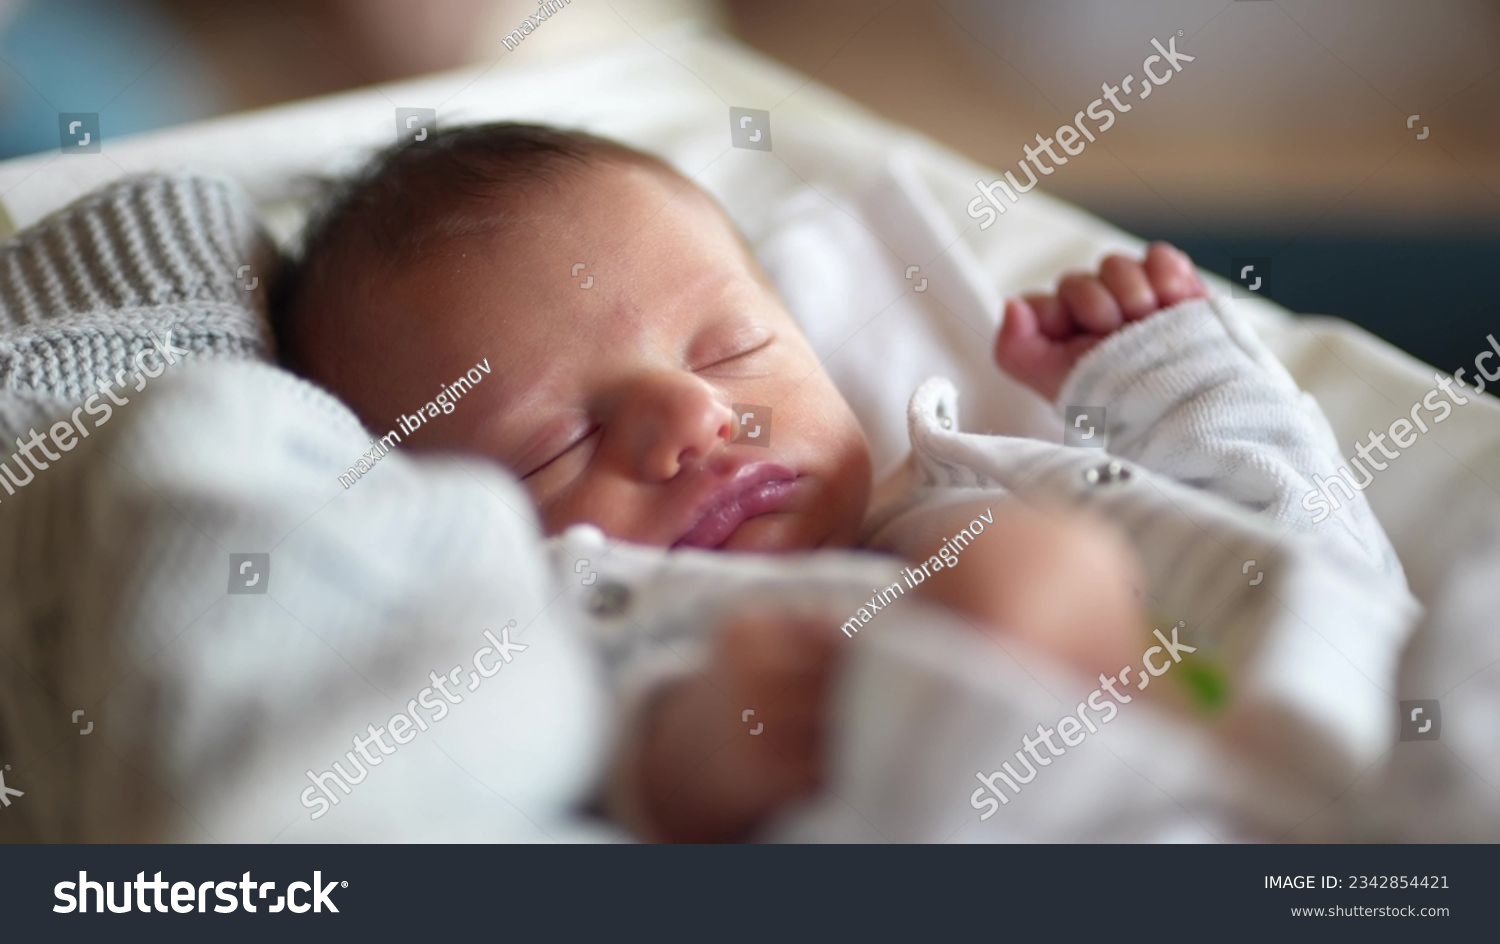 newborn baby sleep. boy infant sleep lies in child bed. happy family birthday closeup baby lifestyle concept. cute baby close up sleeping in bed at home #2342854421